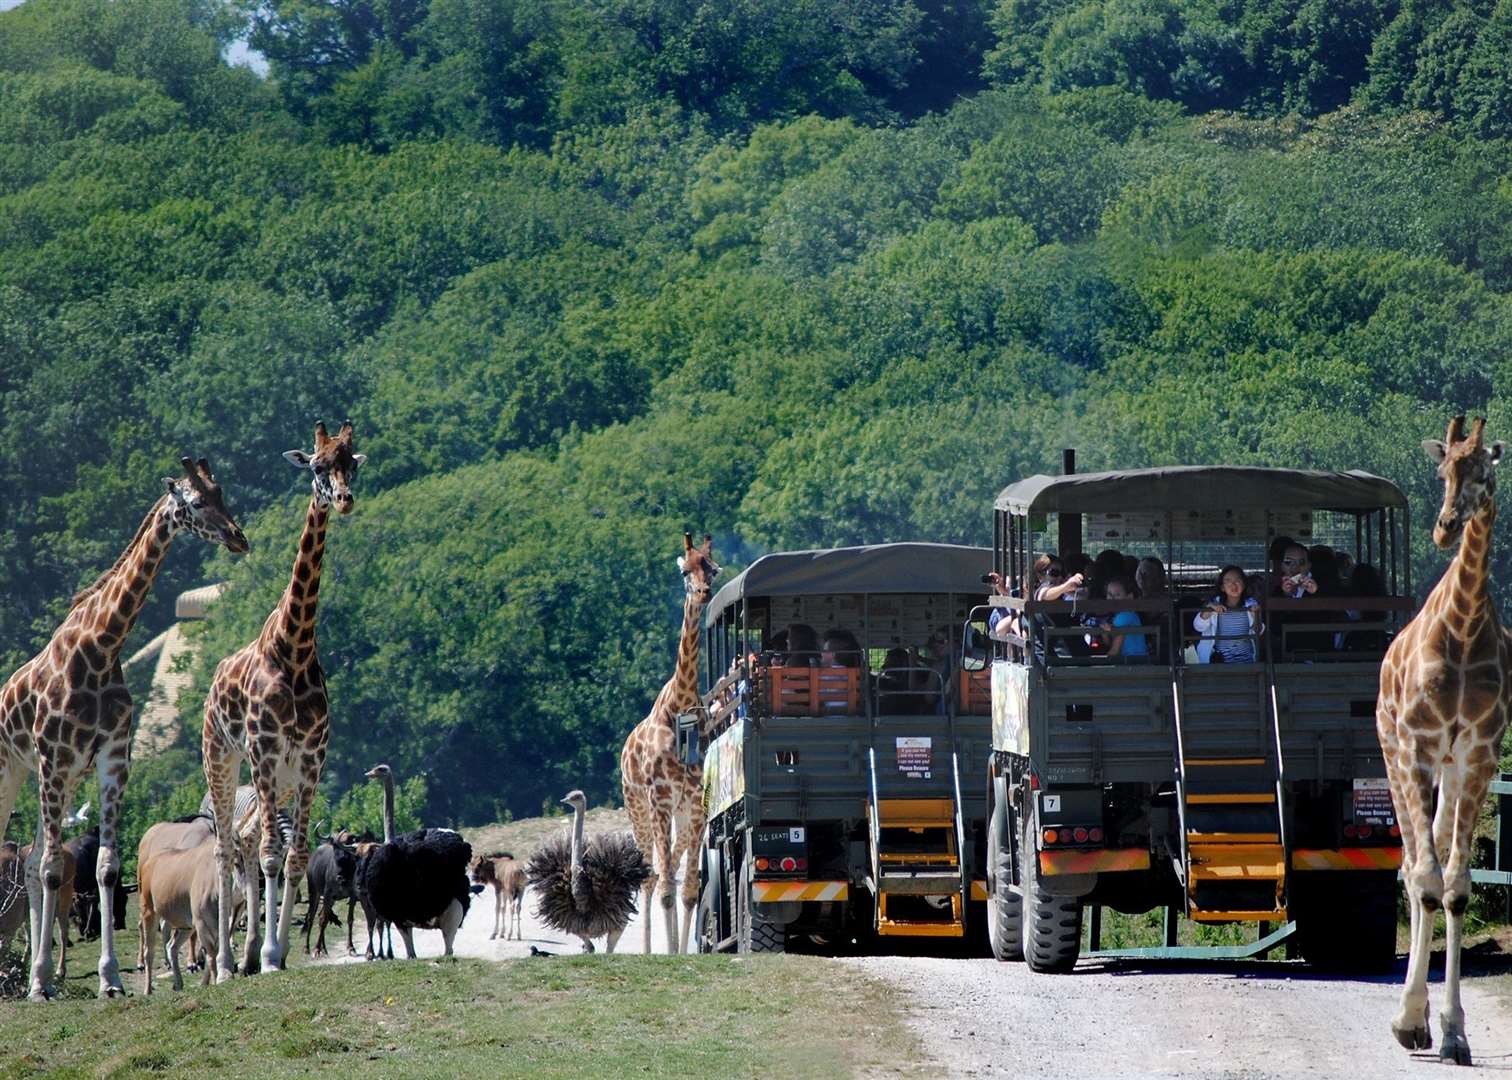 Meet cartoon characters and incredible animals at the stunning nature reserve. Picture: Port Lympne Reserve